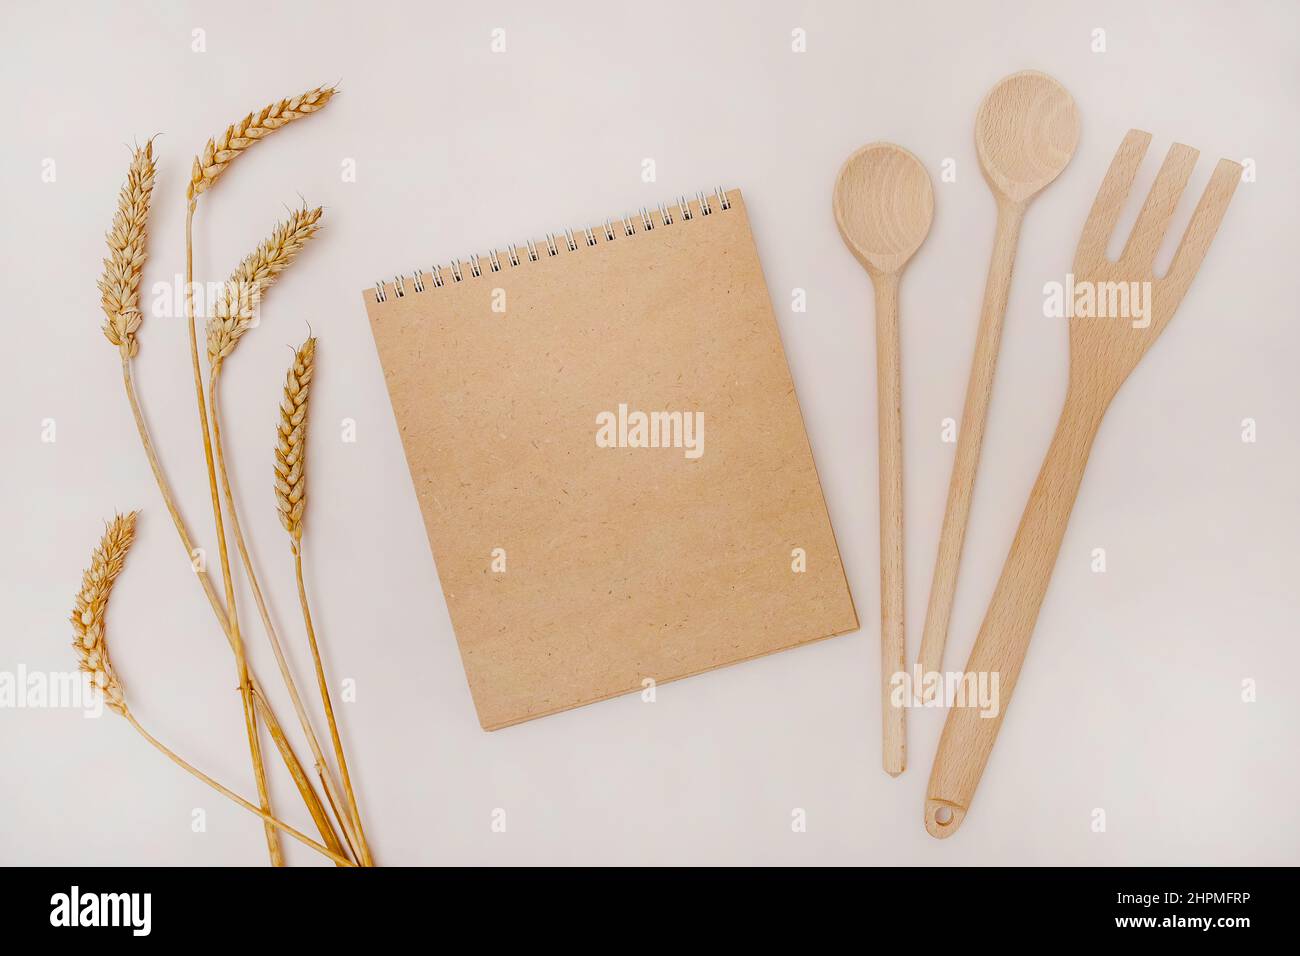 Recycled paper notepad, wooden kitchen tools and ears of wheat Stock Photo